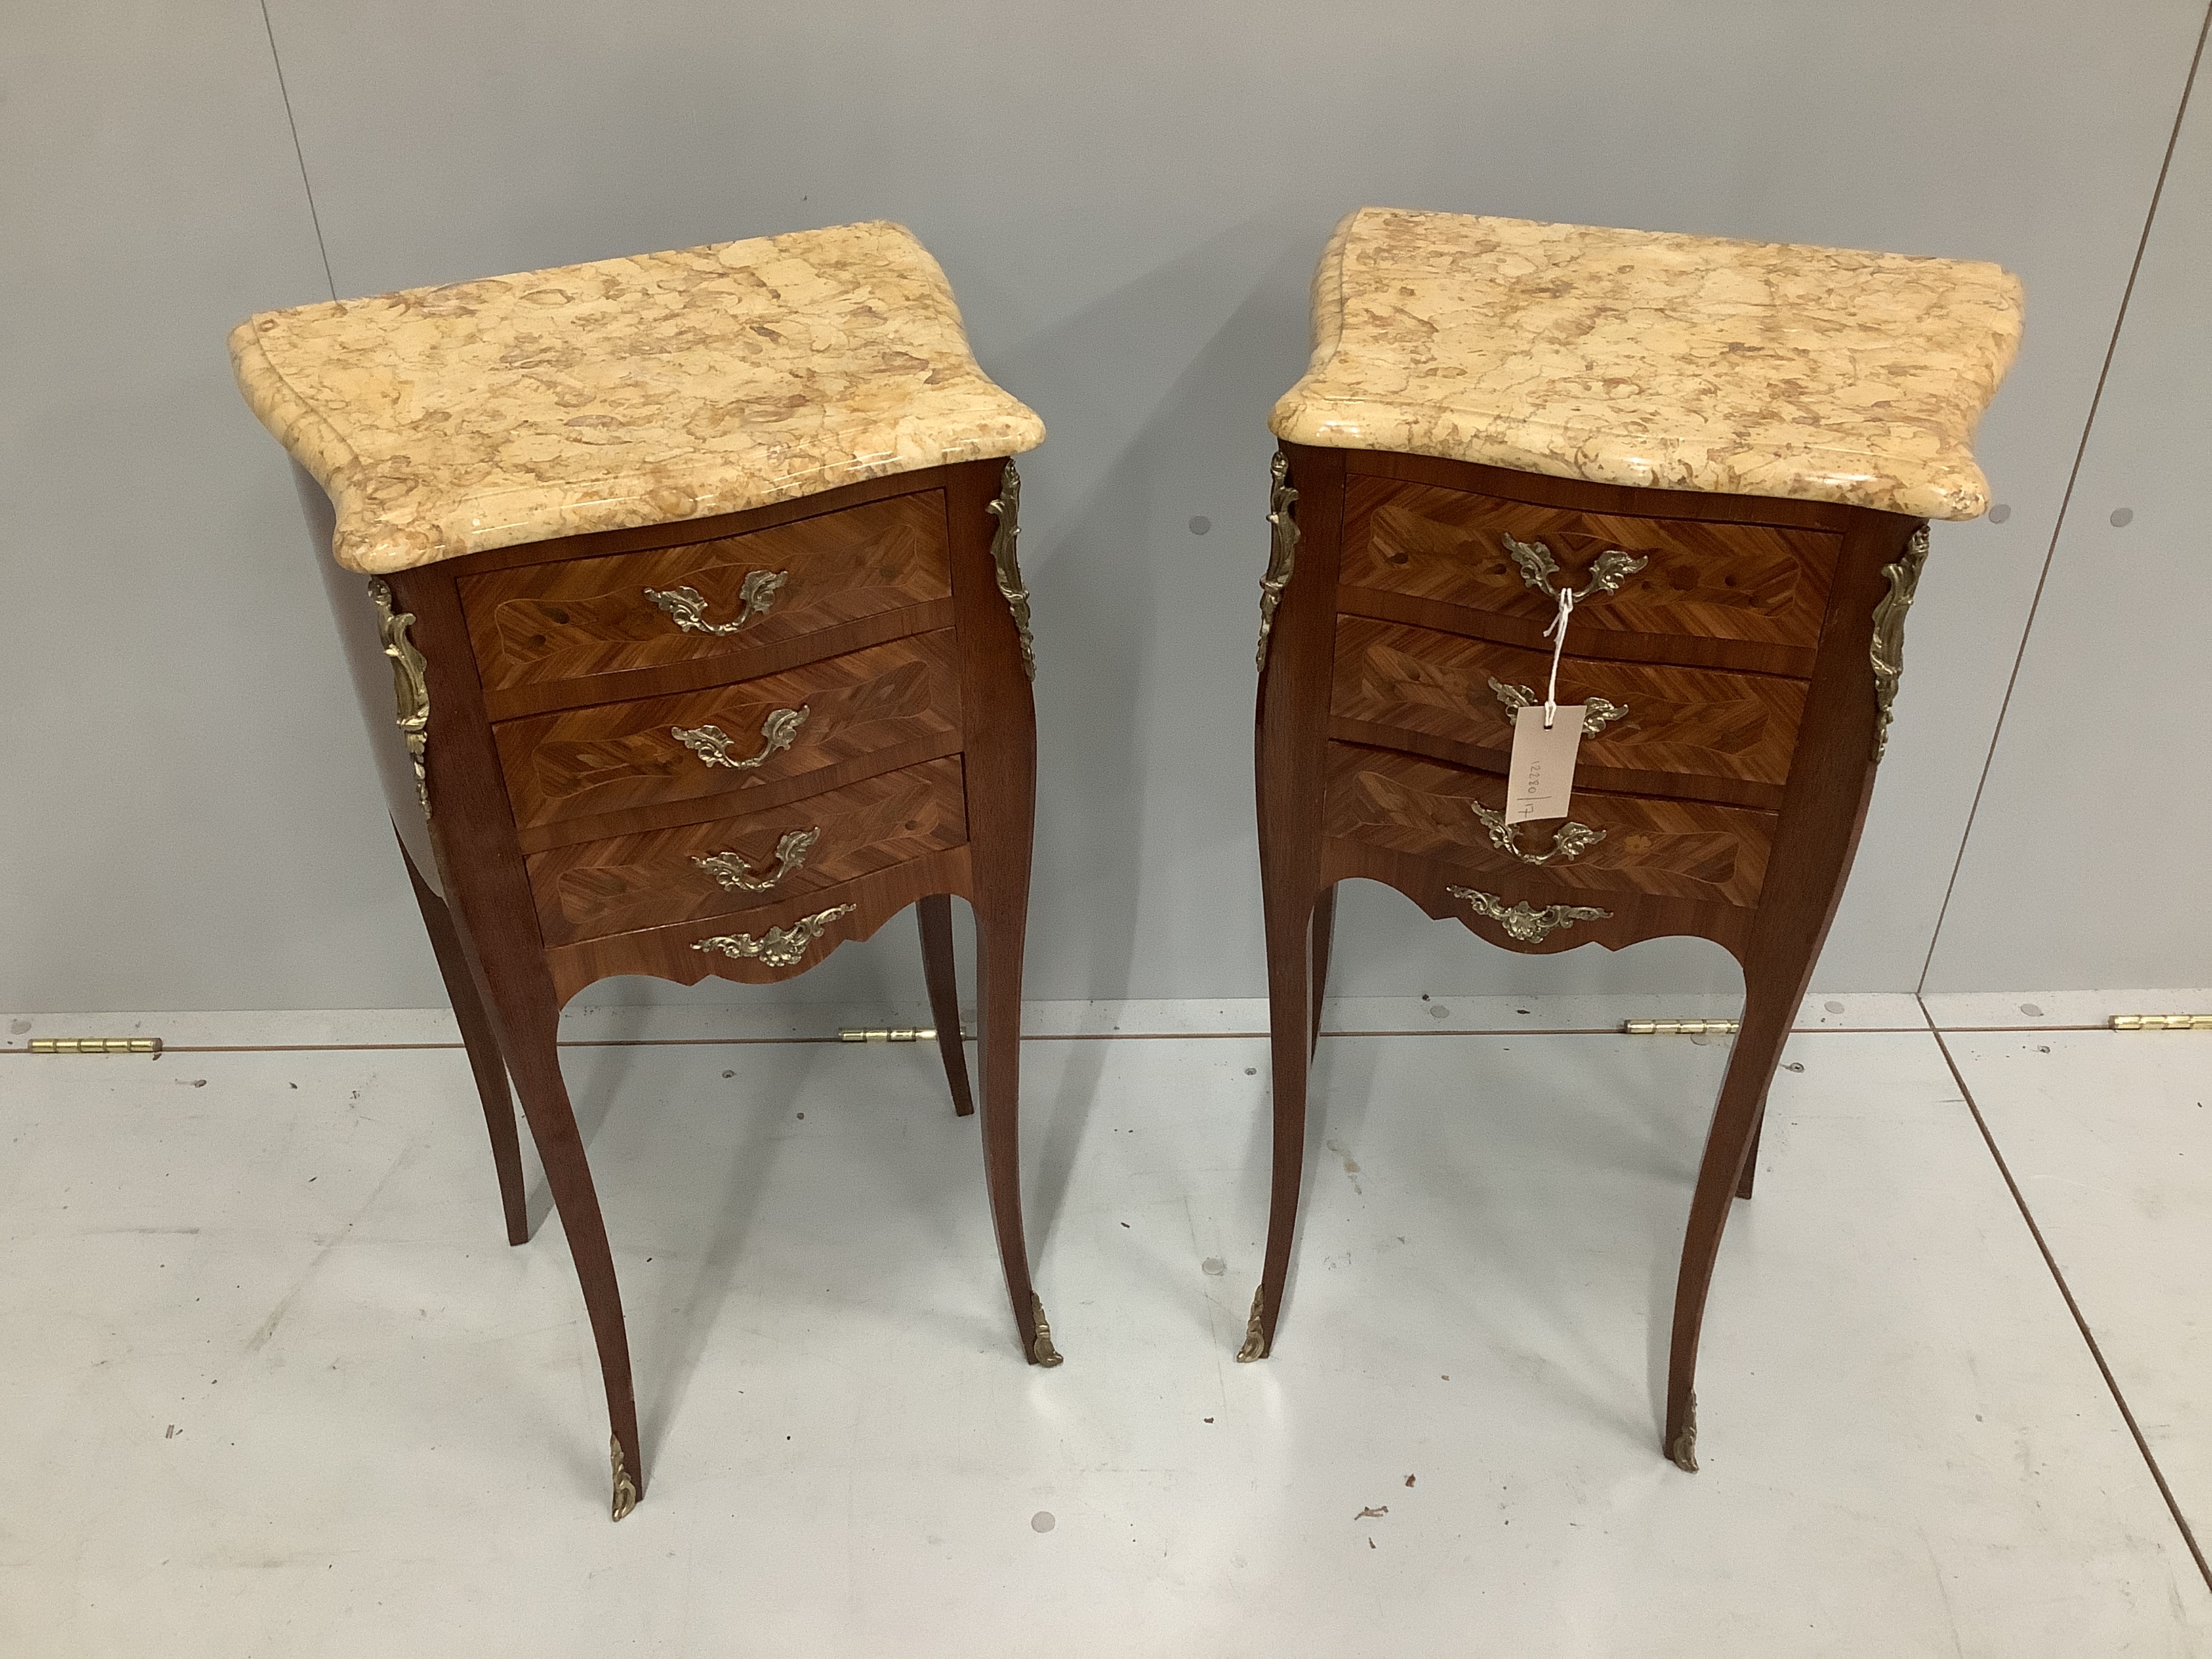 A pair of Louis XV style gilt metal mounted marquetry inlaid kingwood marble topped bedside chests, width 40cm, depth 29cm, height 73cm